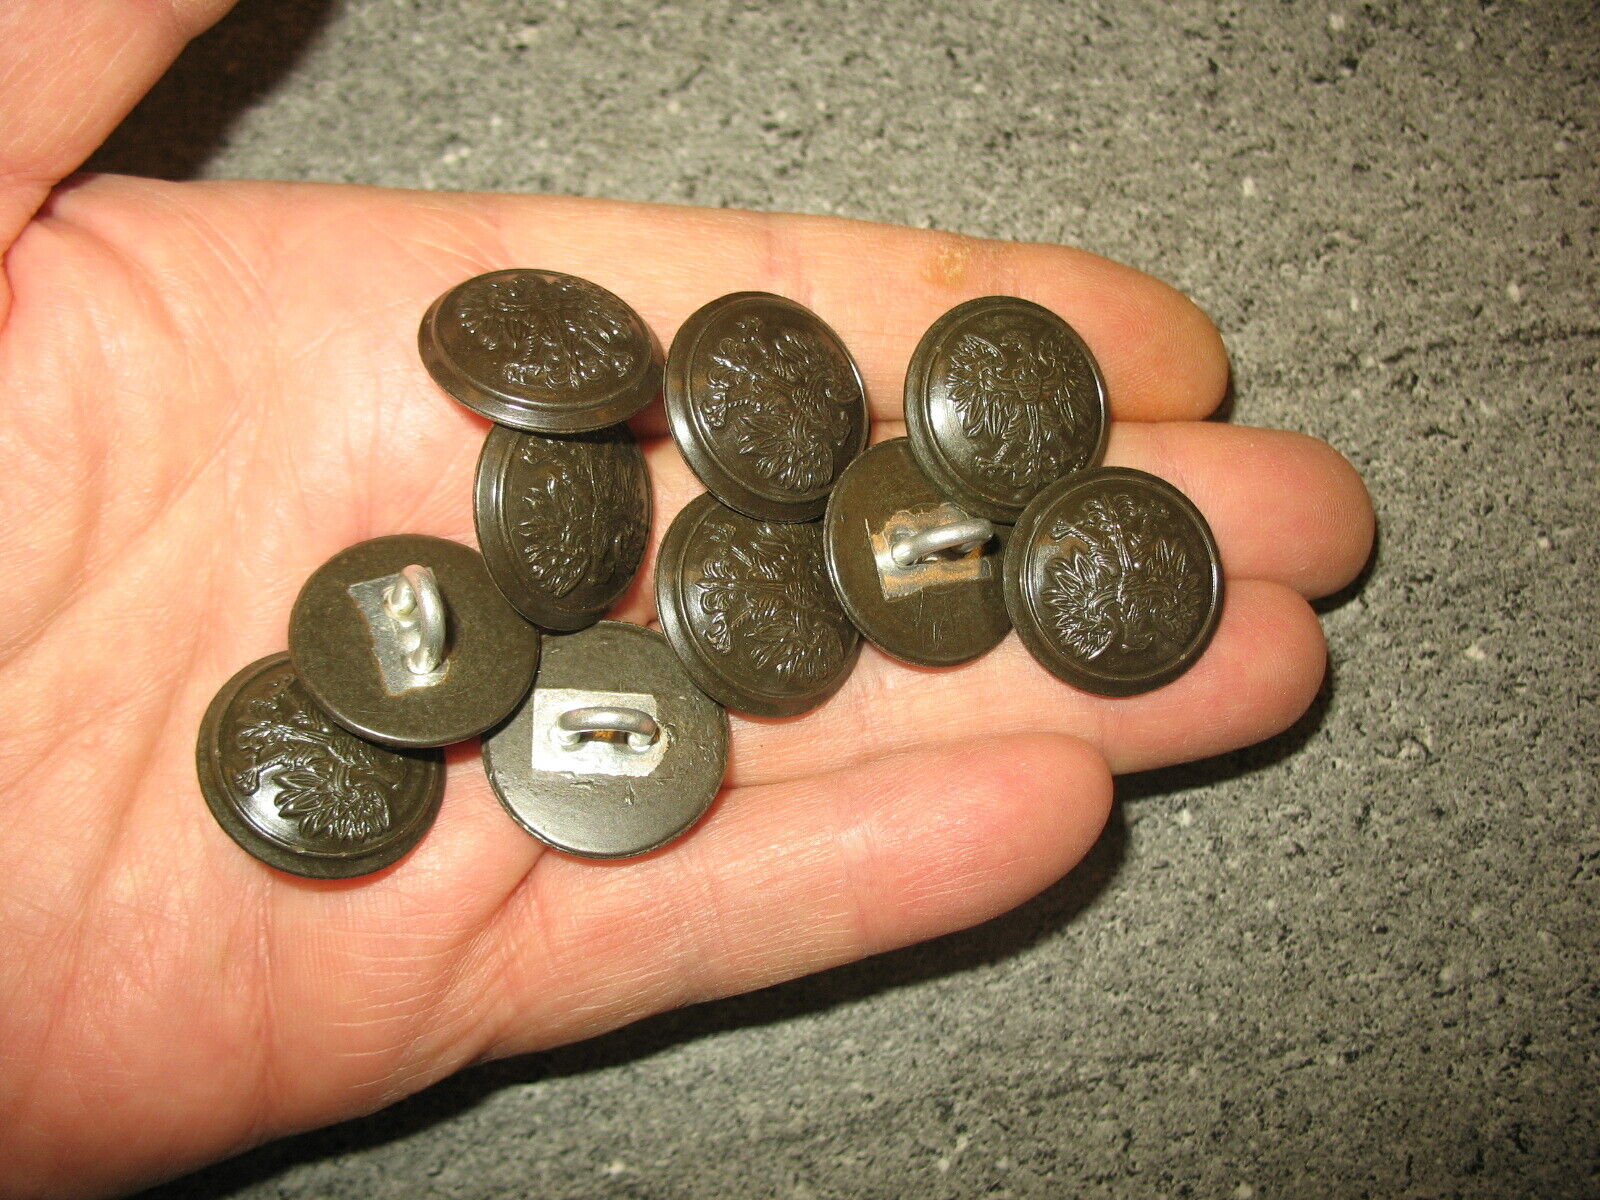 10 pieces of old Polish military buttons